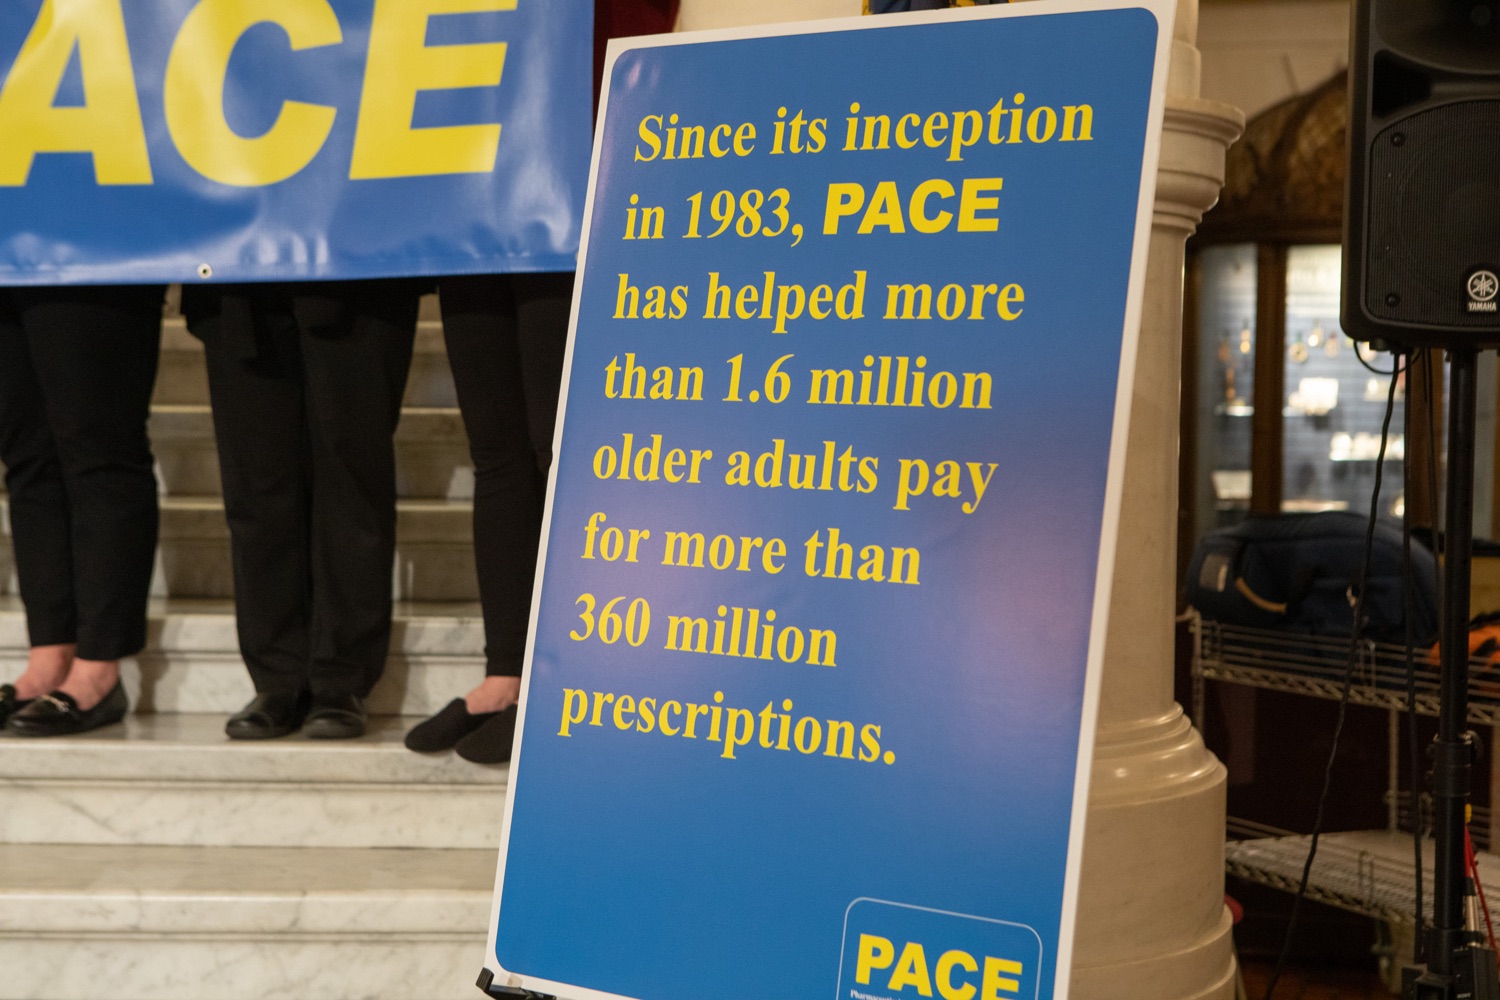 Pennsylvania Department of Aging Secretary Jason Kavulich is joined by state leaders and program staff to commemorate 40 years since the passage of legislation that created the Pharmaceutical Assistance Contract for the Elderly (PACE) Program...Since its inception in 1983, PACE has been offering low-cost prescription medication to qualified Pennsylvanians aged 65 and older and has served more than 1.6 million older adults..<br><a href="https://filesource.amperwave.net/commonwealthofpa/photo/23968_PDA_PACE_ERD_002.jpg" target="_blank">⇣ Download Photo</a>